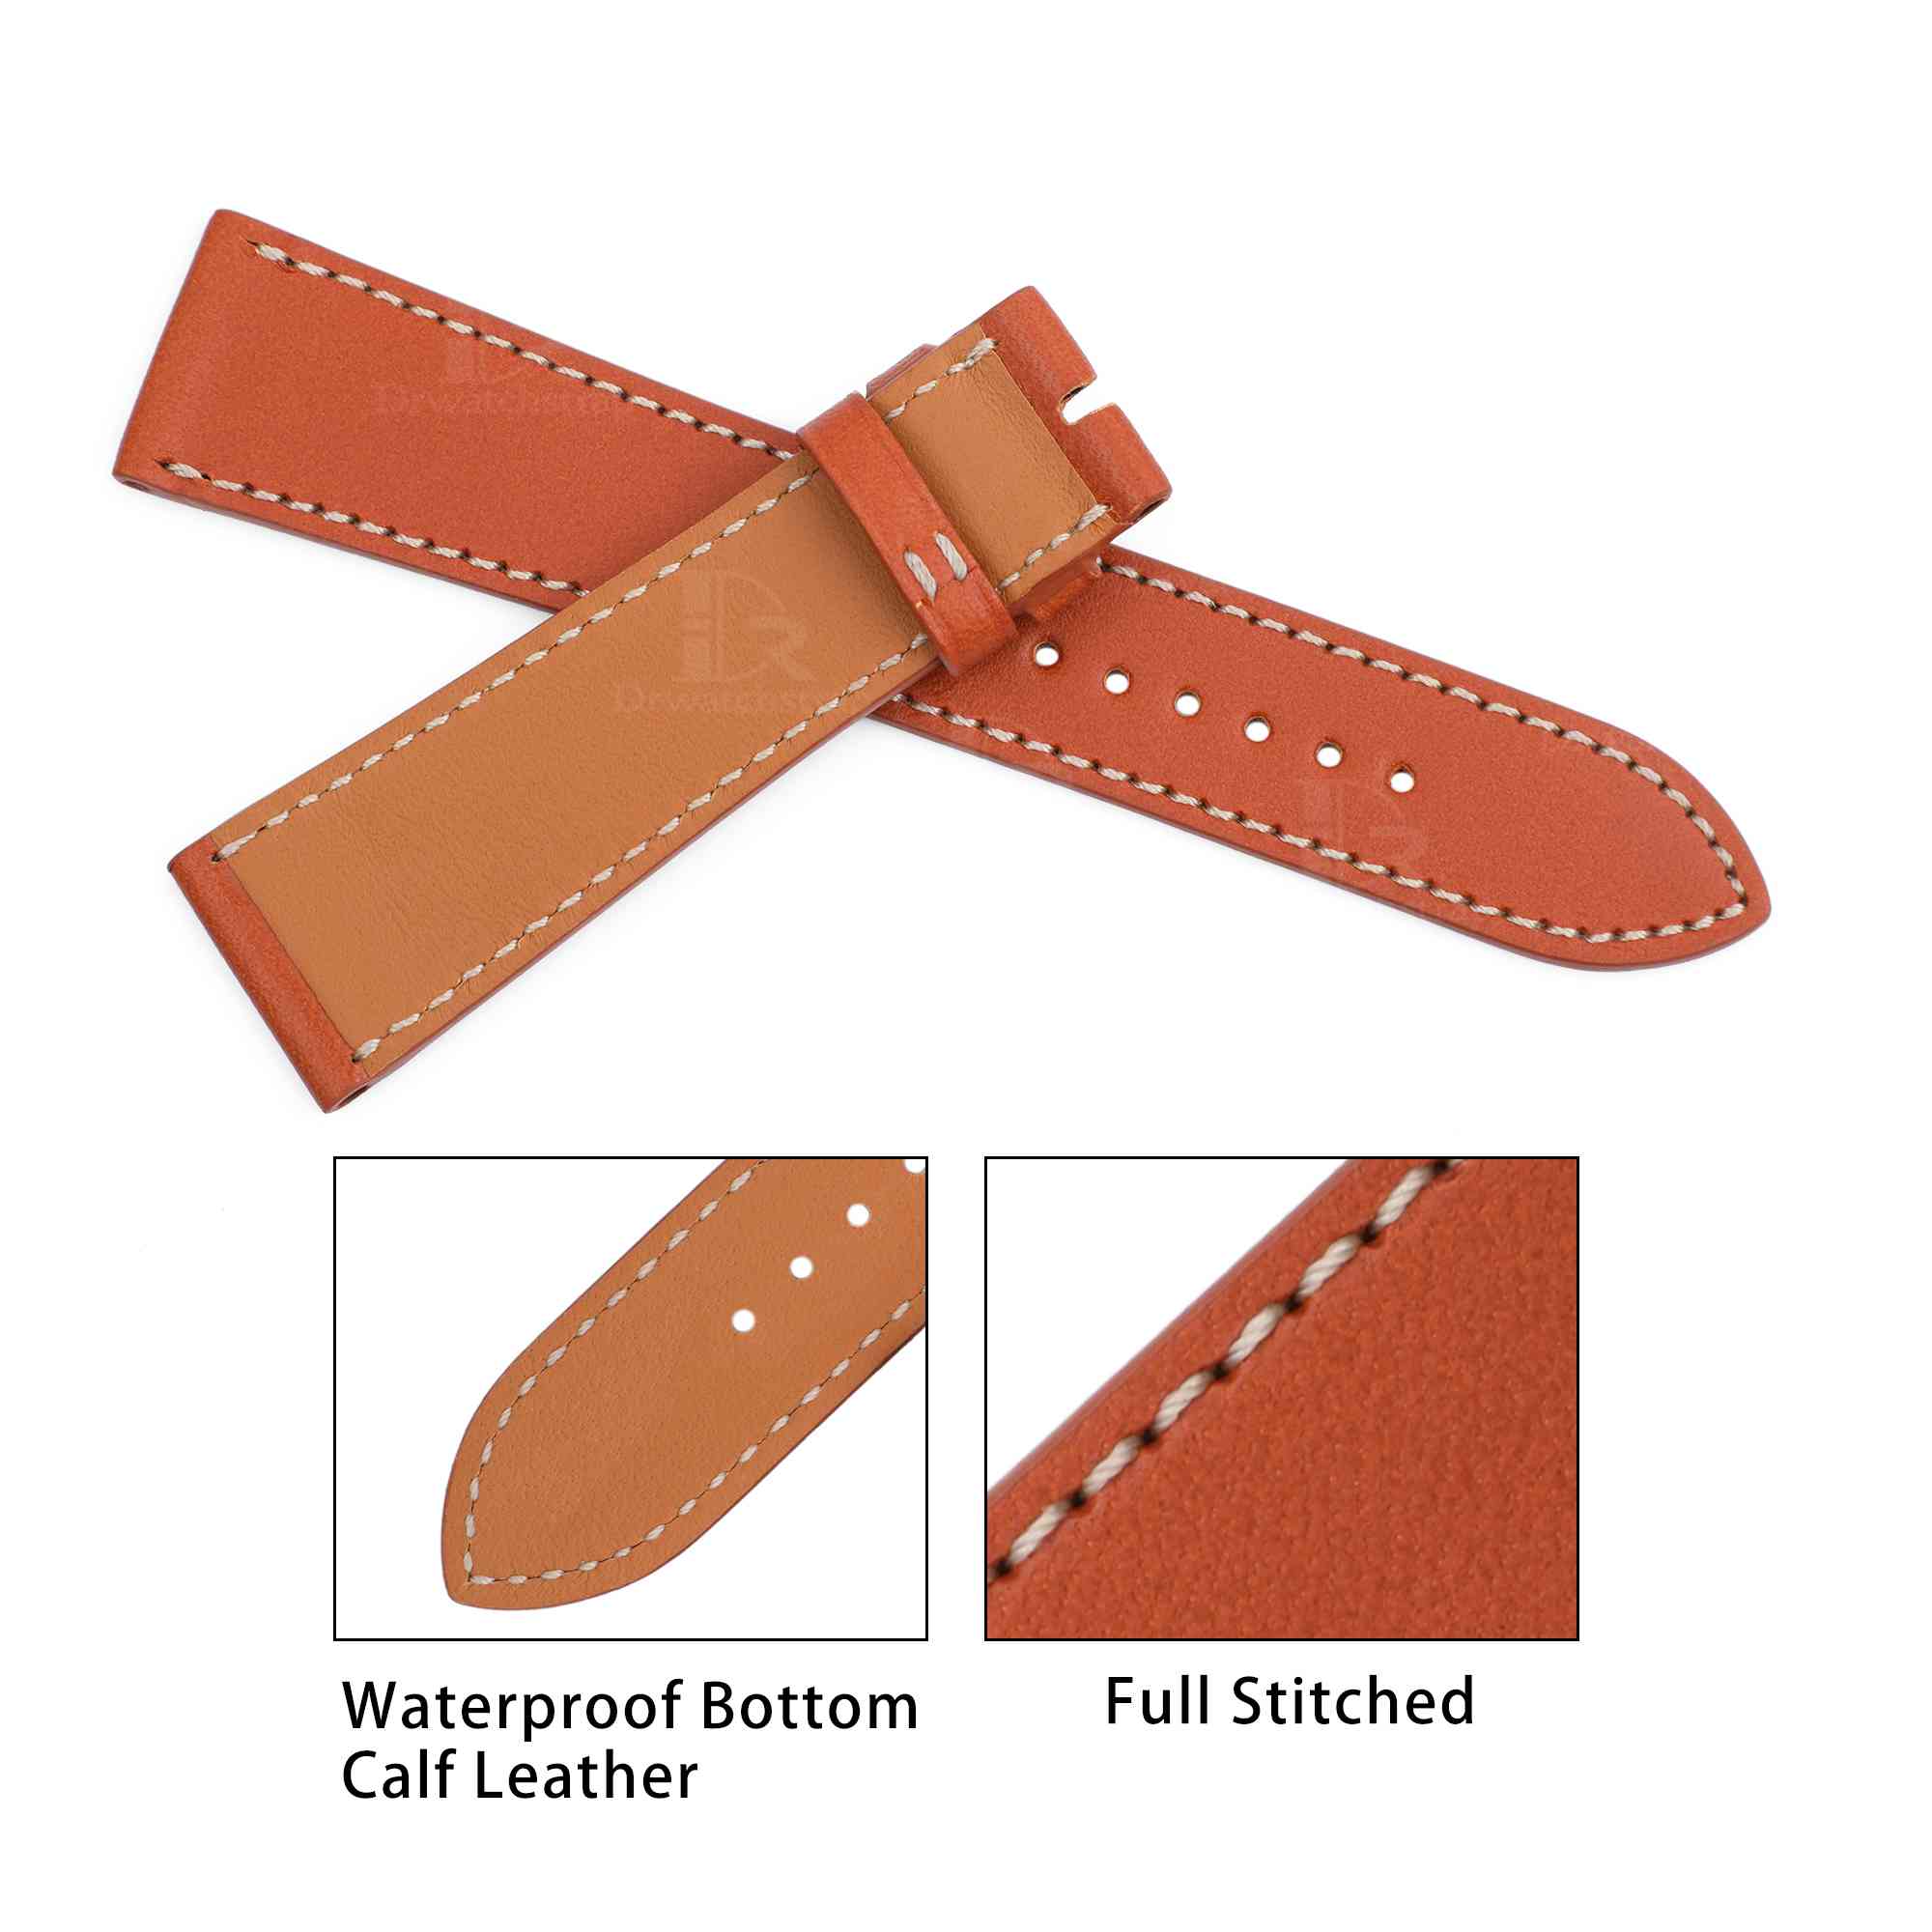 Premium best quality custom OEM orange calfskin 20mm single tour sinlge wrap leather band and watch strap replacement for Hermes Heure H and Hermes Cape Cod luxury watches - Shop the high-end calf material straps and watchbands online at a low price